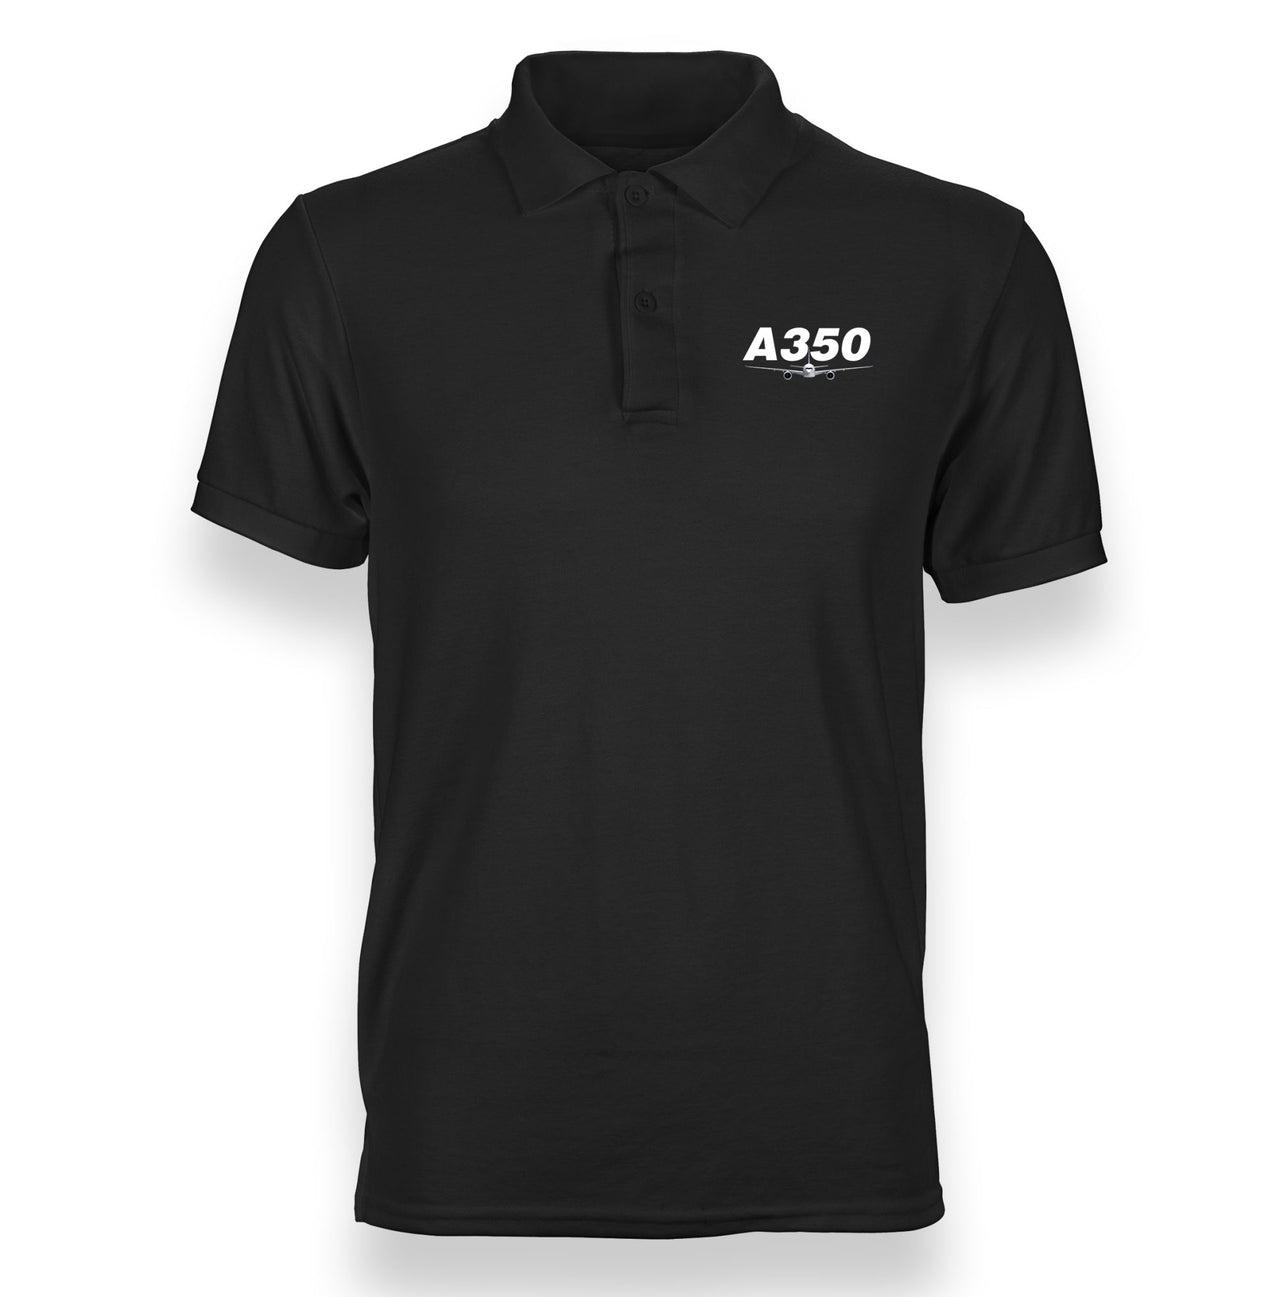 Super Airbus A350 Designed "WOMEN" Polo T-Shirts